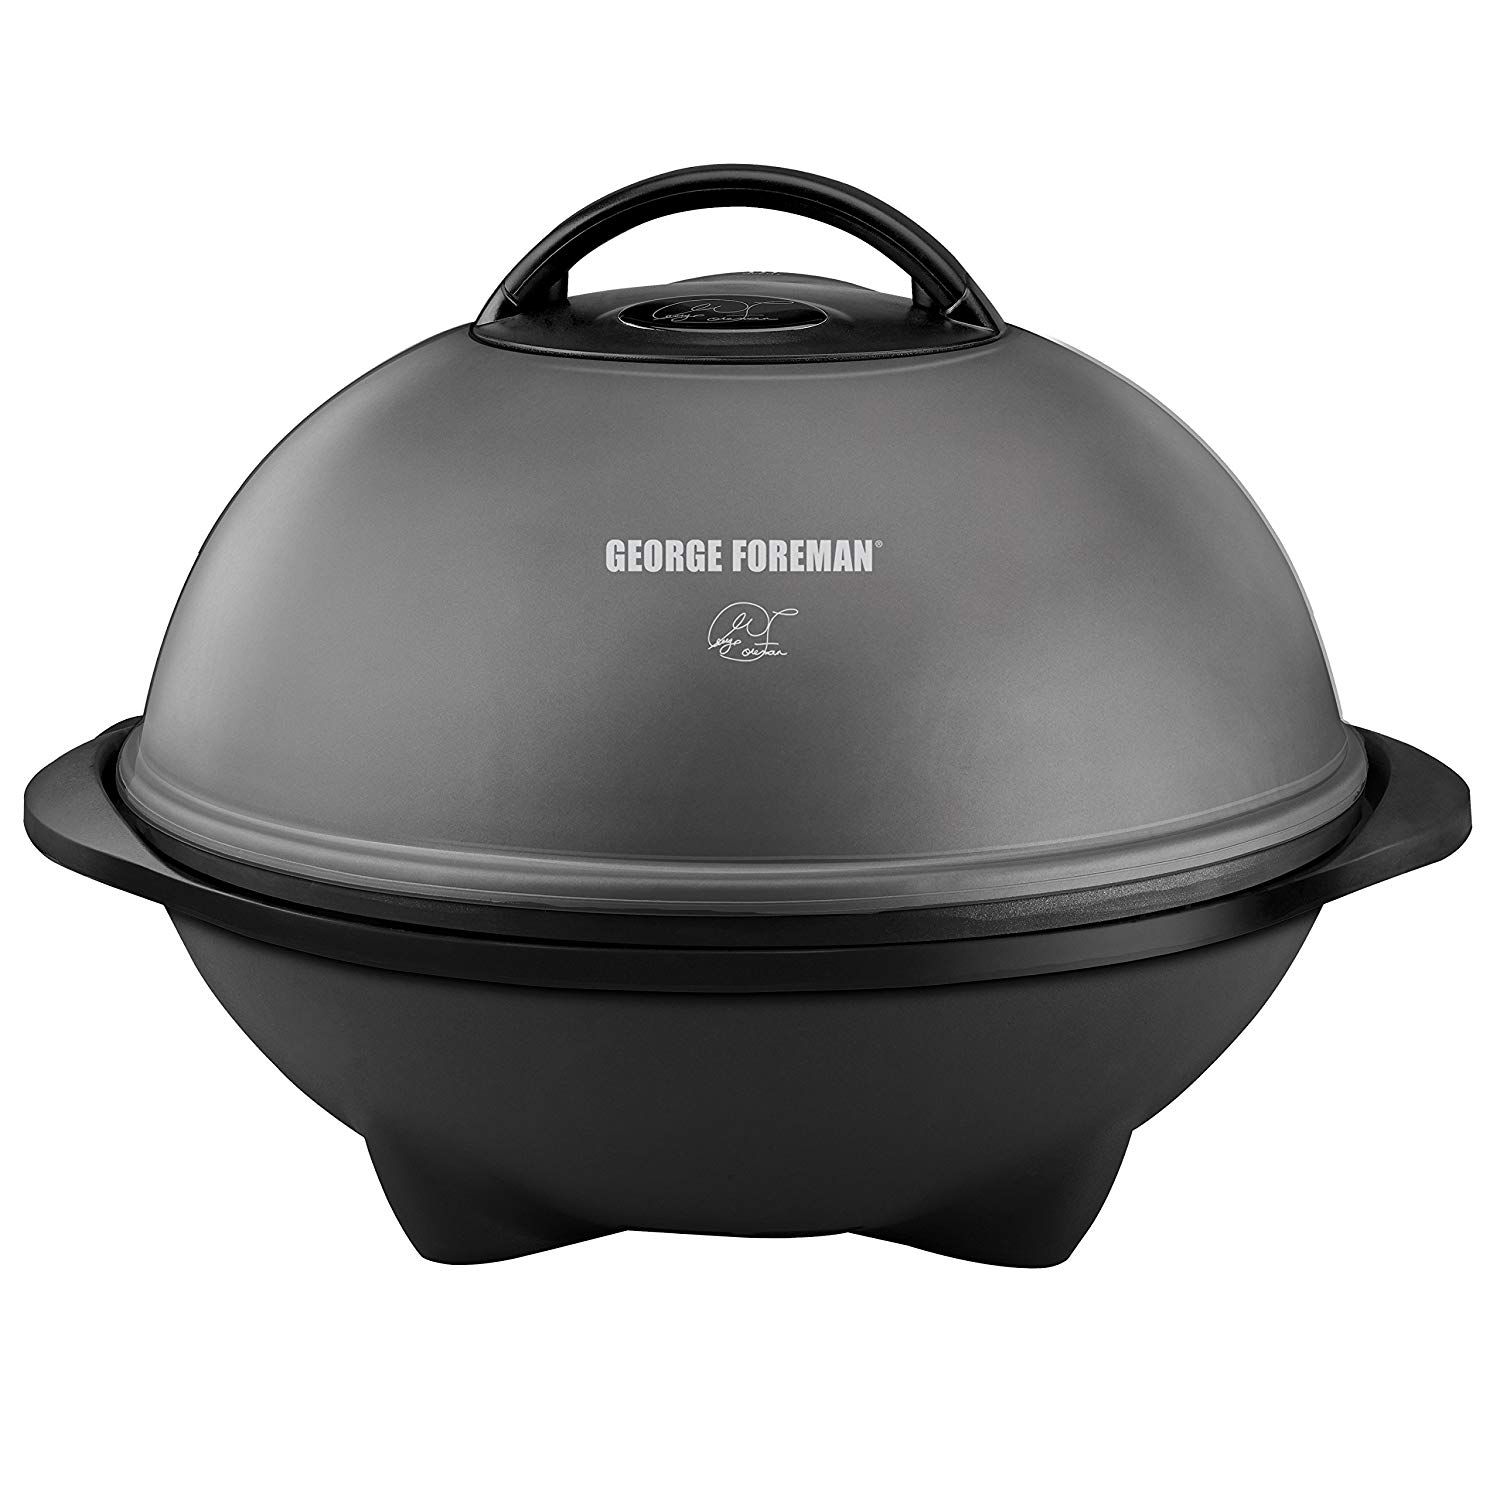 Who Has Gas Grills On Sale - Buy Electric, Charcoal and Propane Grills At Best Prices